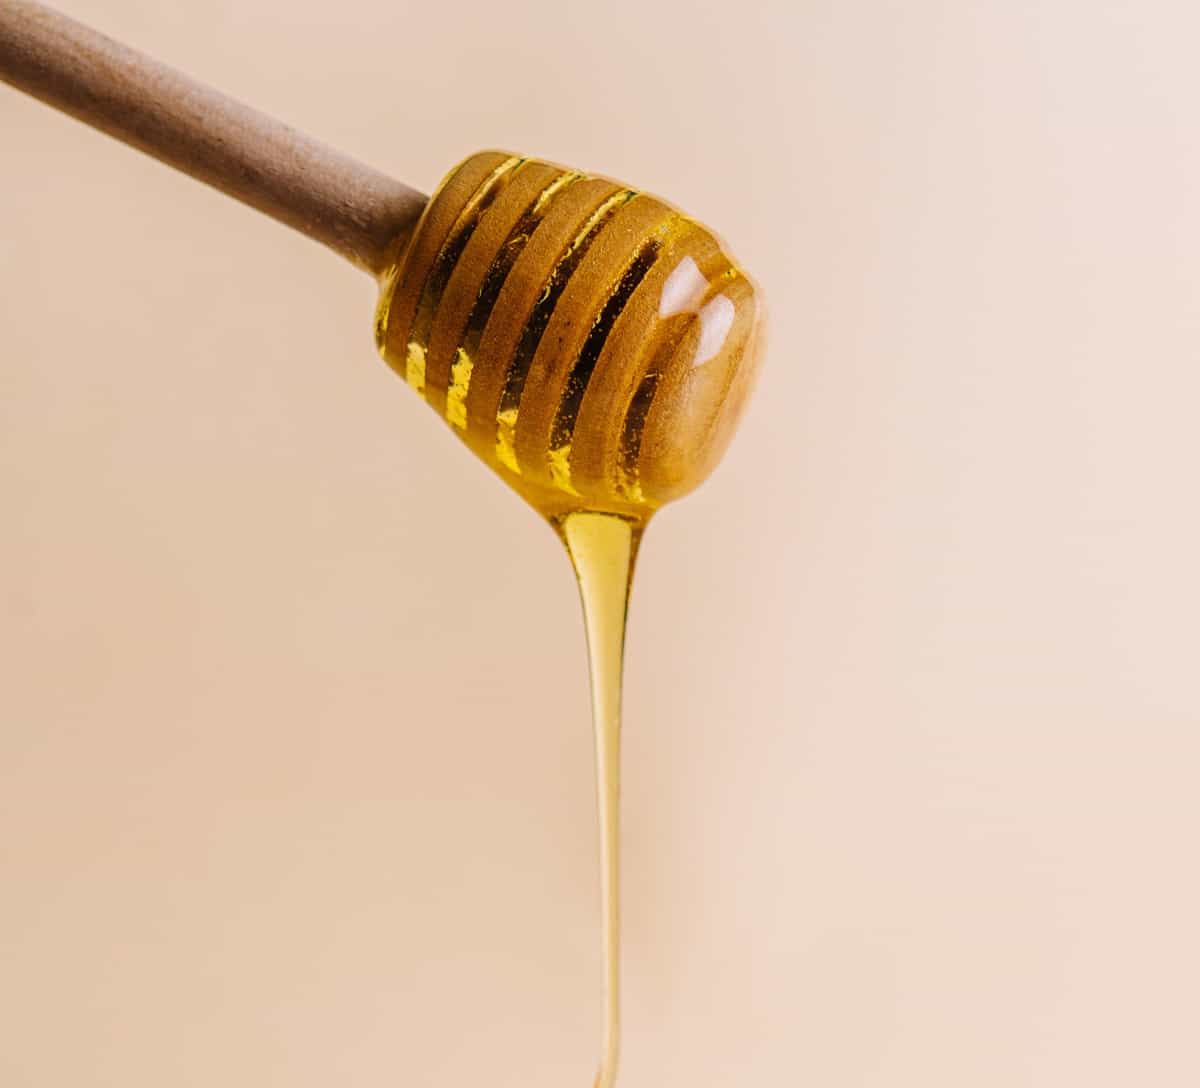 Honey Production and Packaging